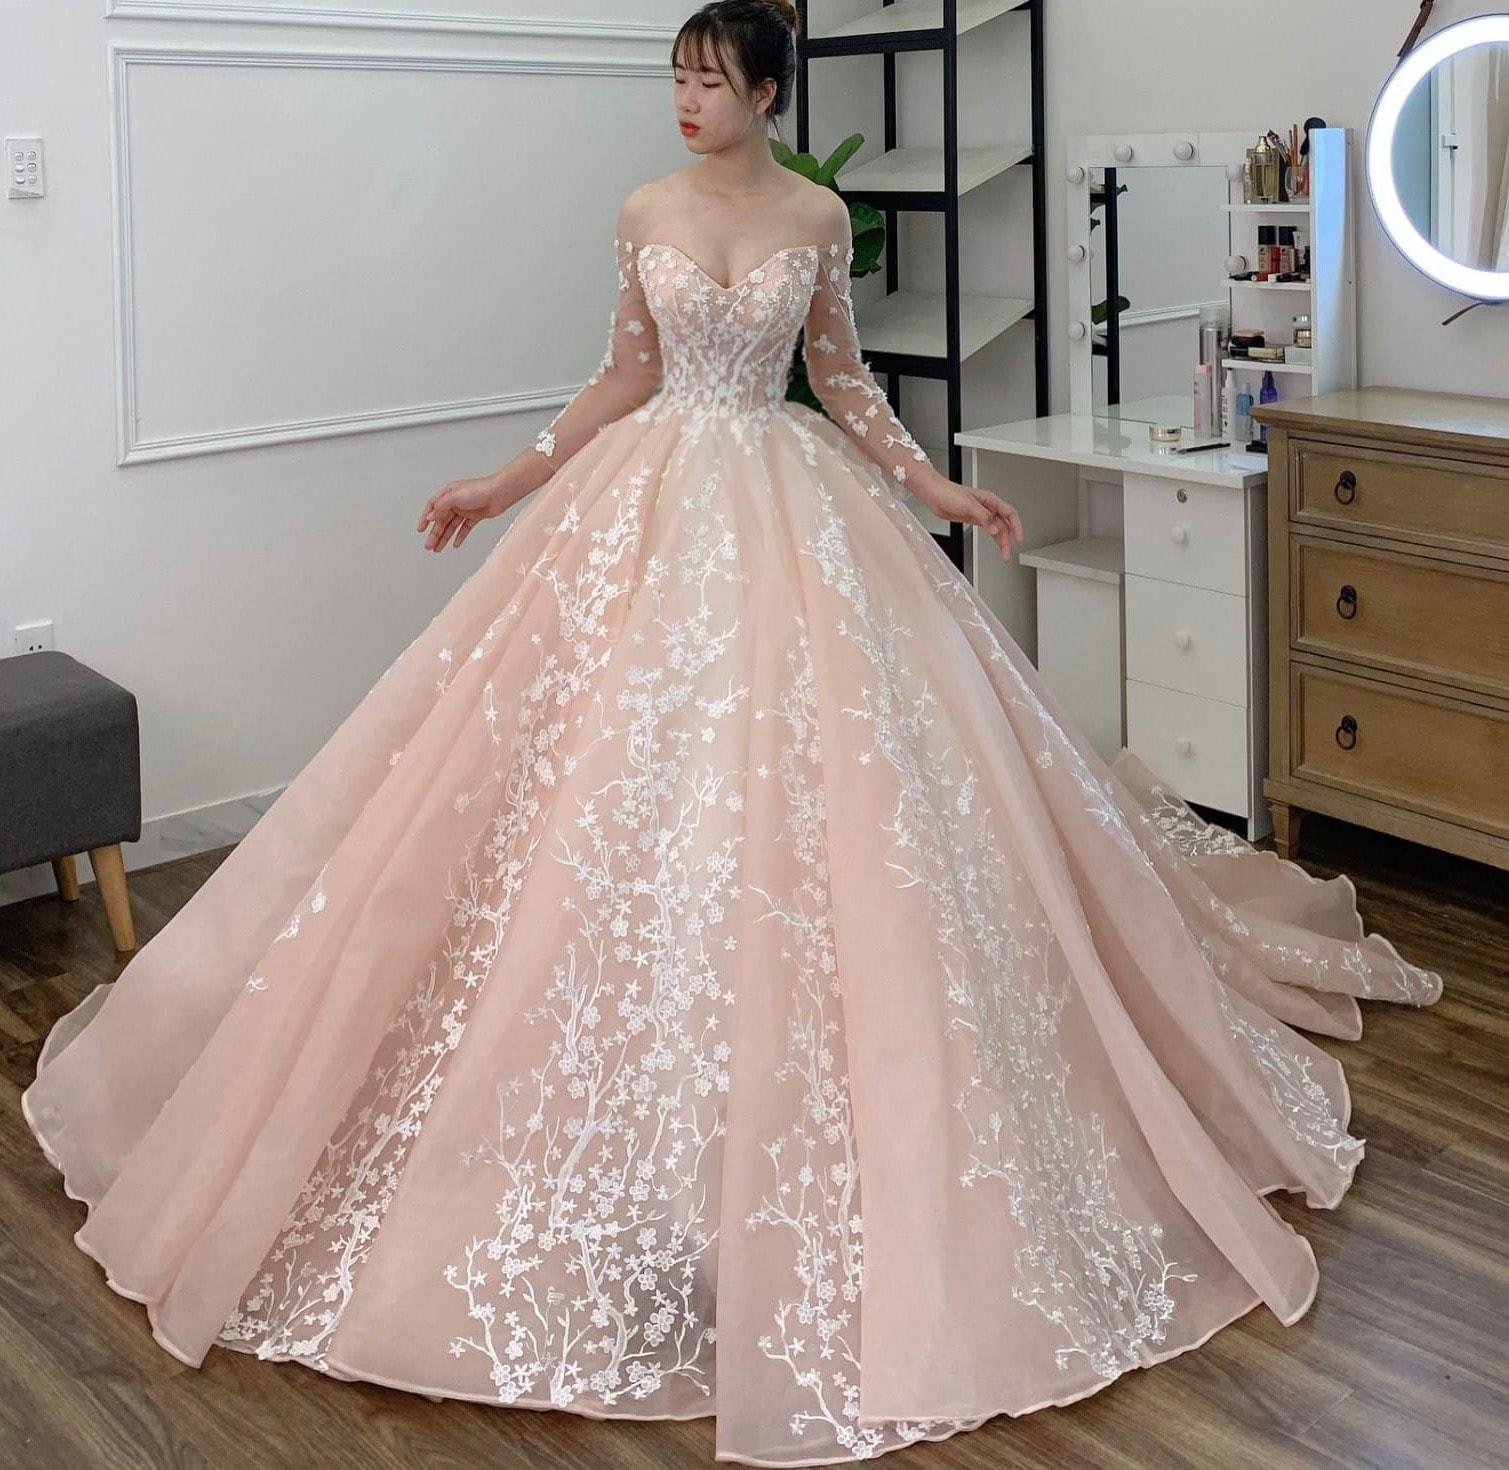 Pink Lace Ball Gown Wedding Dress with Floral Accents